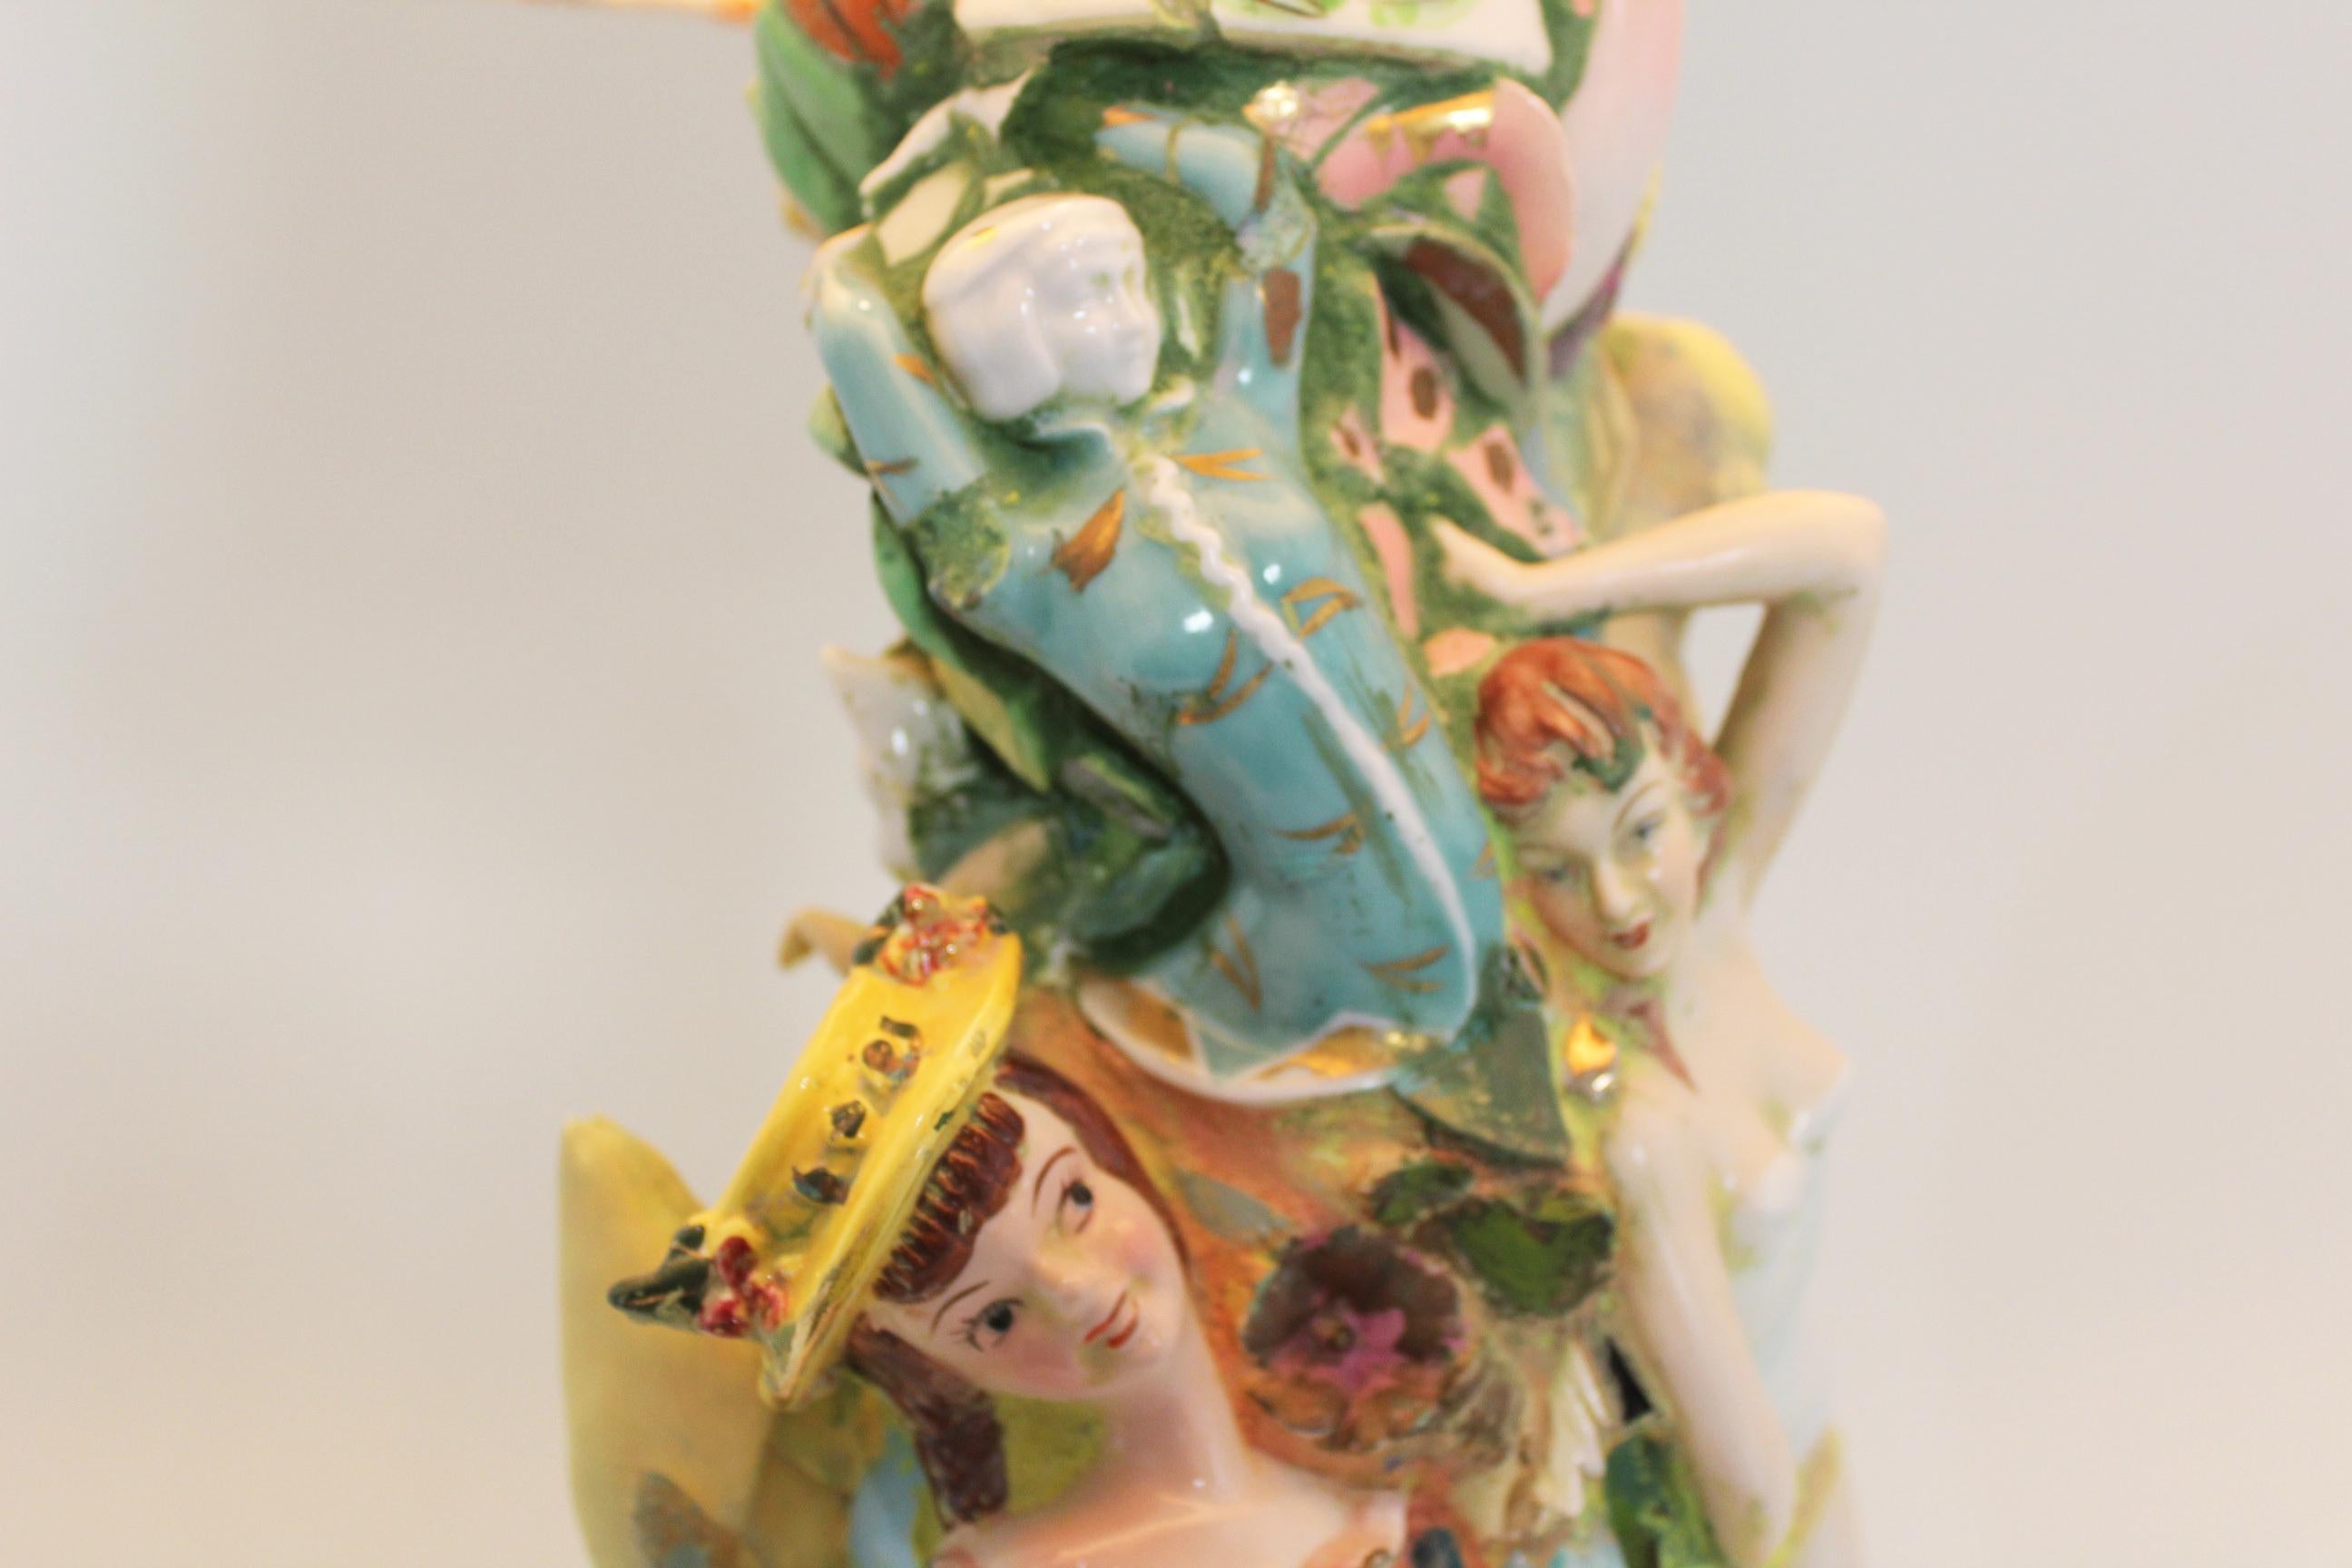 This is a mixed media sculpture that is also a fully functioning lamp. The artist, Shannon Landis Hansen, works to incorporate ceramic figures, mosaic tiles, plates, cups and saucers into her pieces. This work reflects her fascination with what